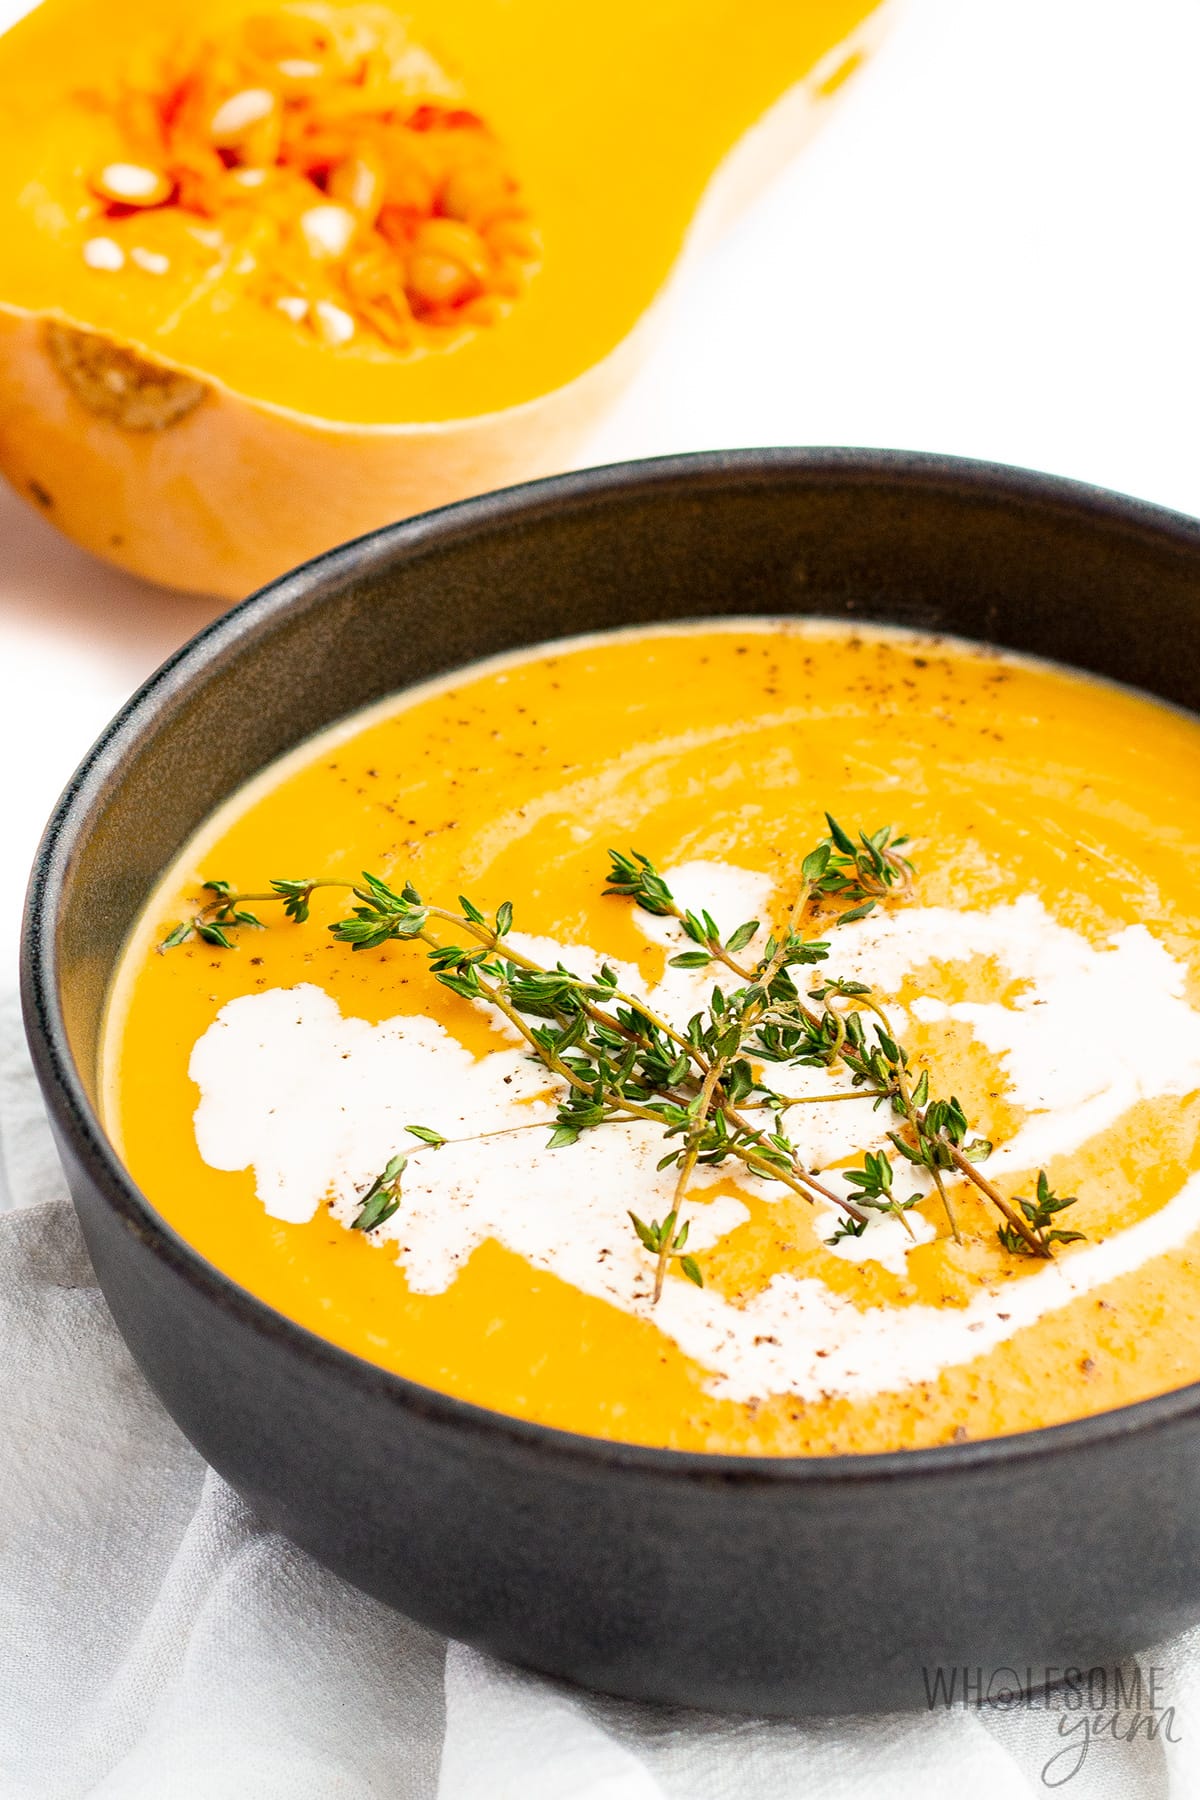 Creamy butternut squash soup with coconut milk drizzle and herb garnish, in a dark bowl.